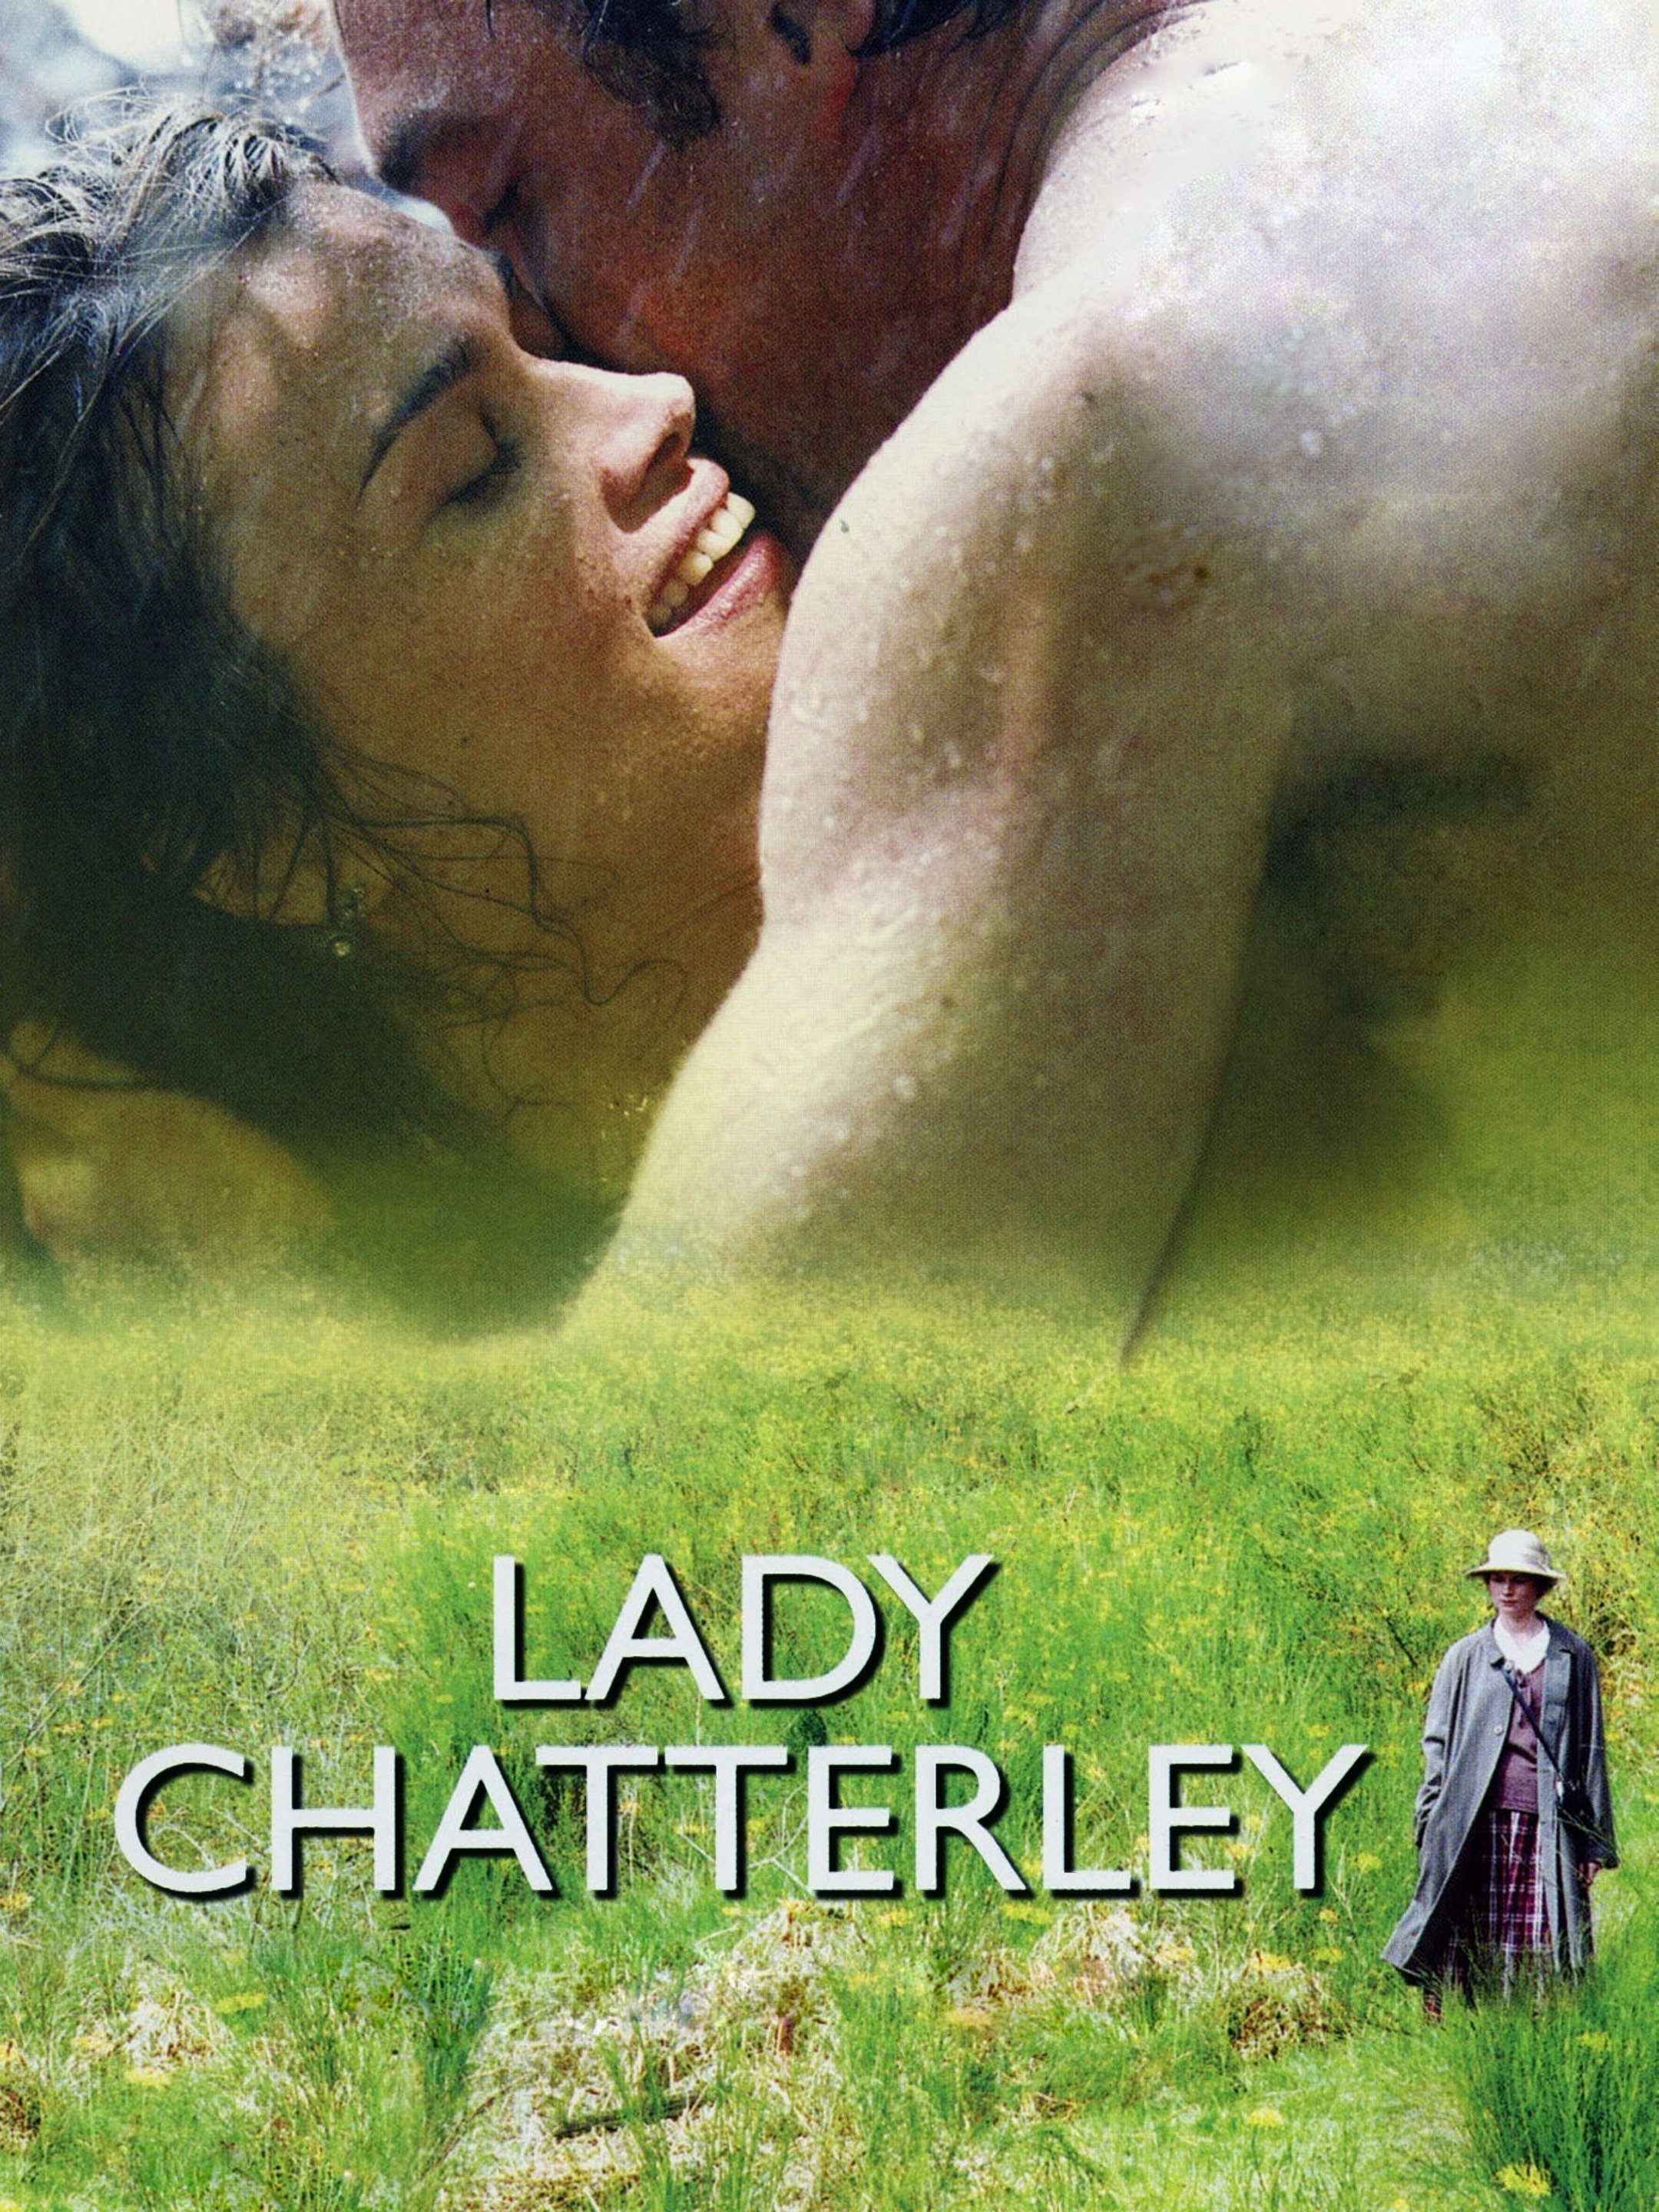 Lady Chatterleys Daughter